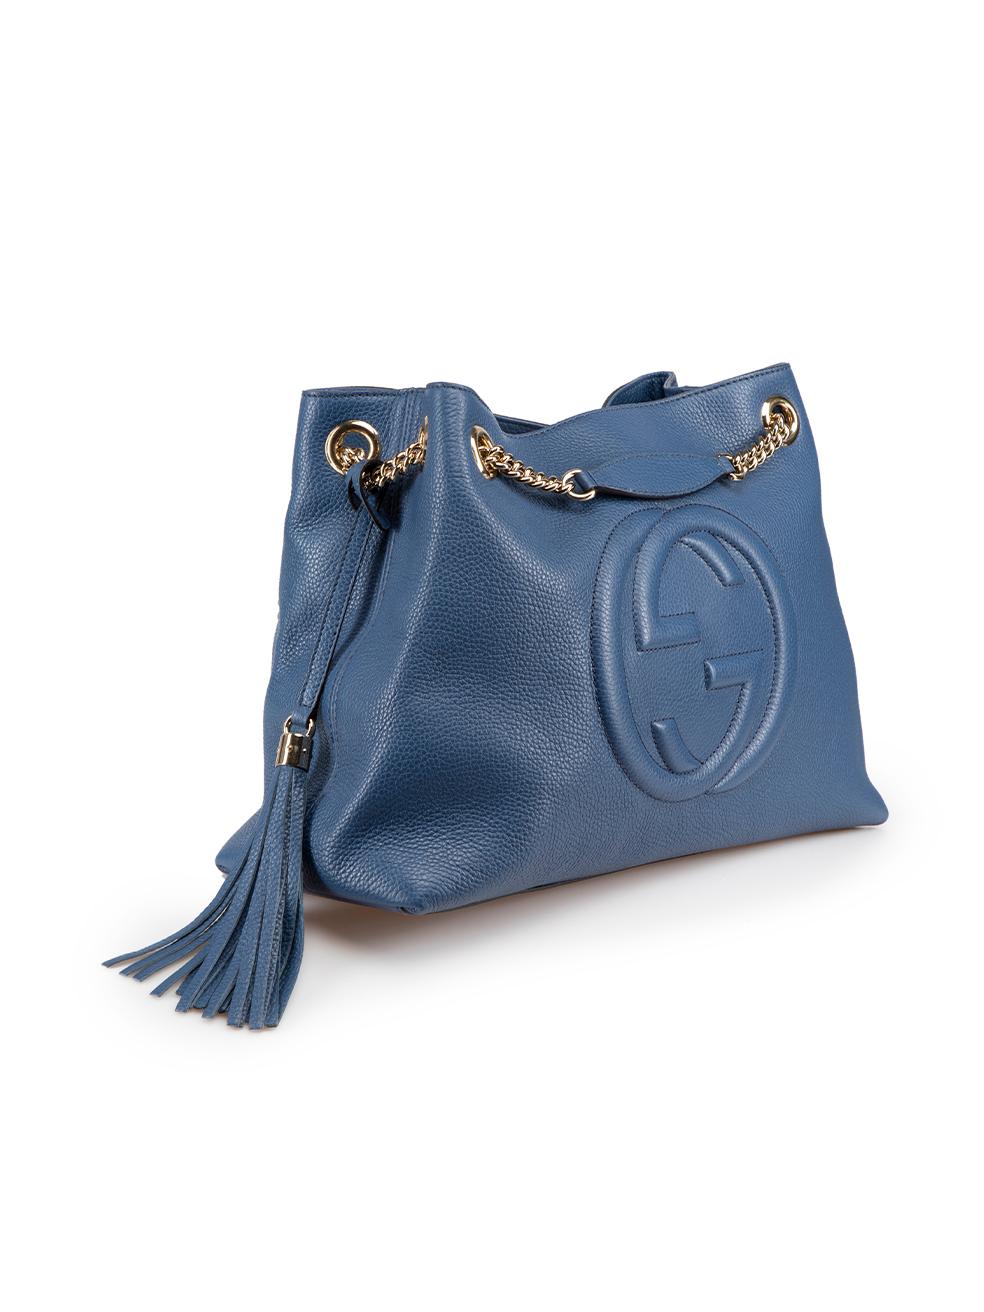 CONDITION is Very good. Minimal wear to bag is evident. Minimal wear to base corners and rear of bag with abrasions to the leather on this used Gucci designer resale item.
 
Details
Medium Soho model
Blue
Leather
Medium tote bag
GG embroidered